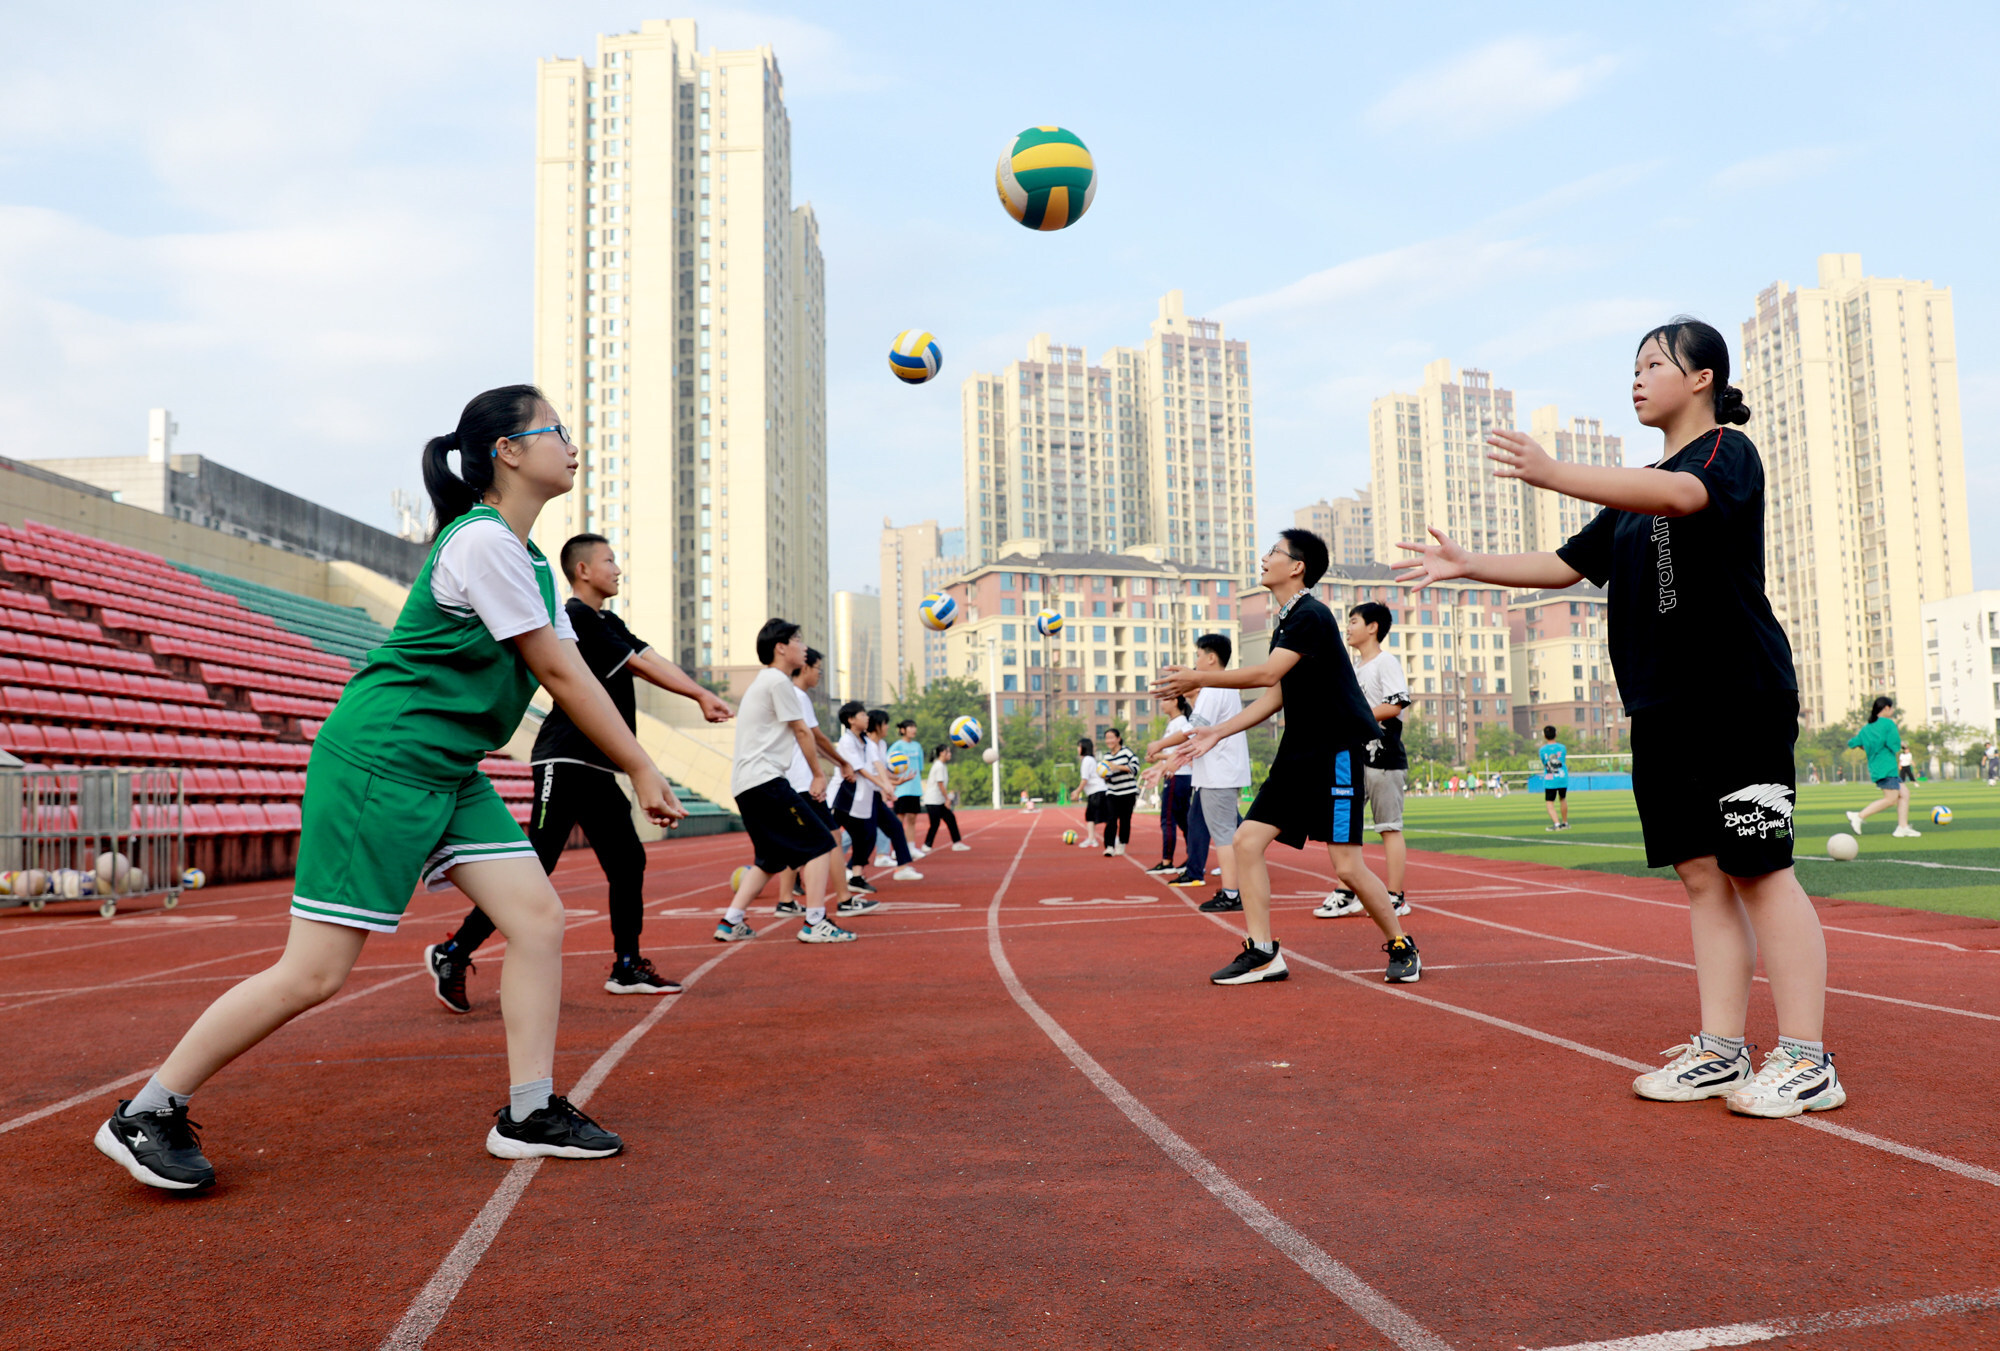 Students play volleyball during a summer programme in Huaying city, Sichuan province. Low fertility rates have made reducing the cost of raising children a priority for Beijing, in the interest of China’s long-term development. Photo: Xinhua